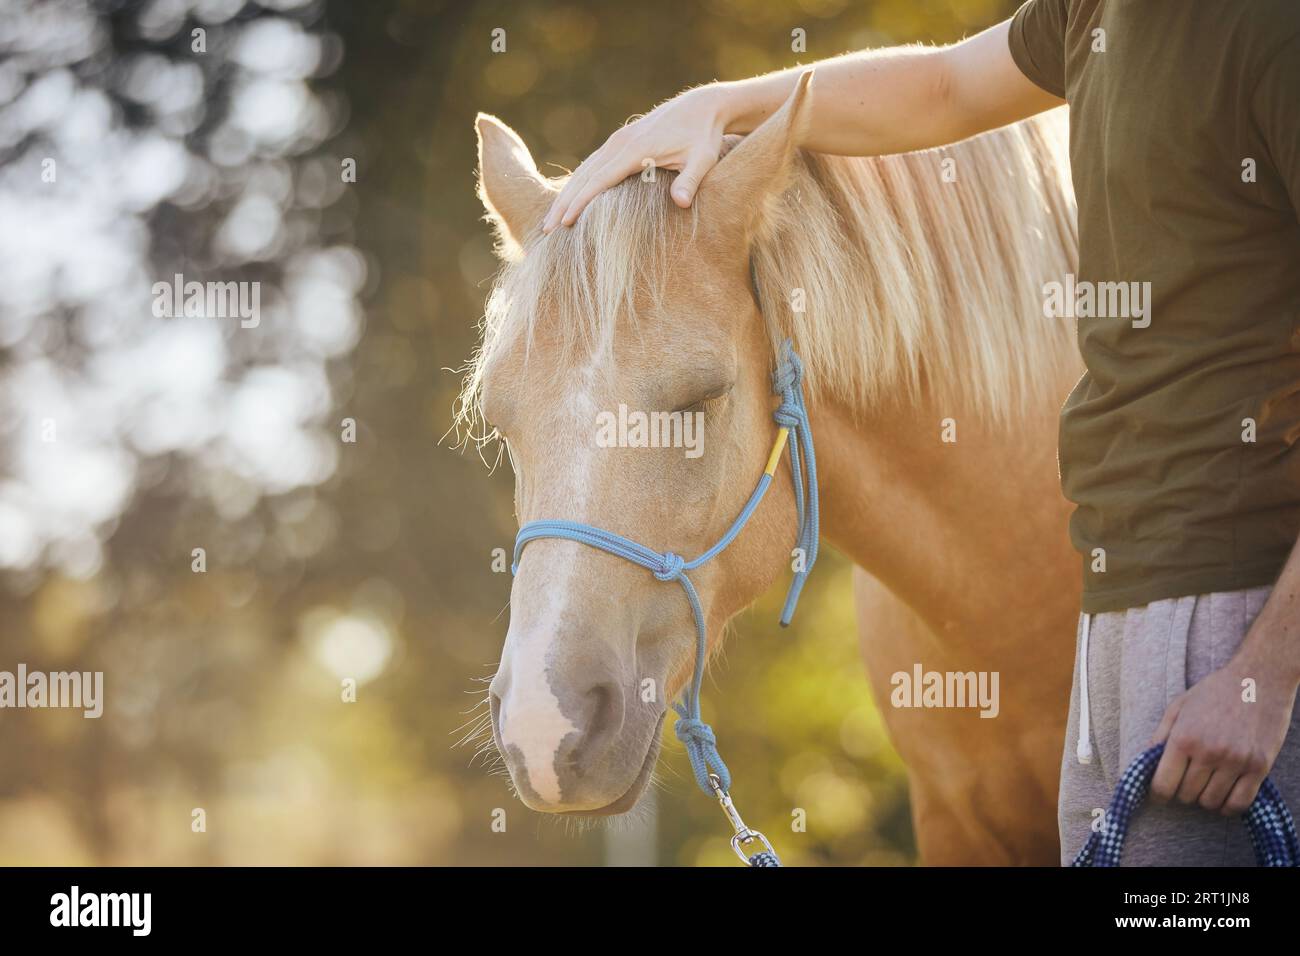 Man is stroking of therapy horse. Themes hippotherapy, care and friendship between people and animals. Stock Photo